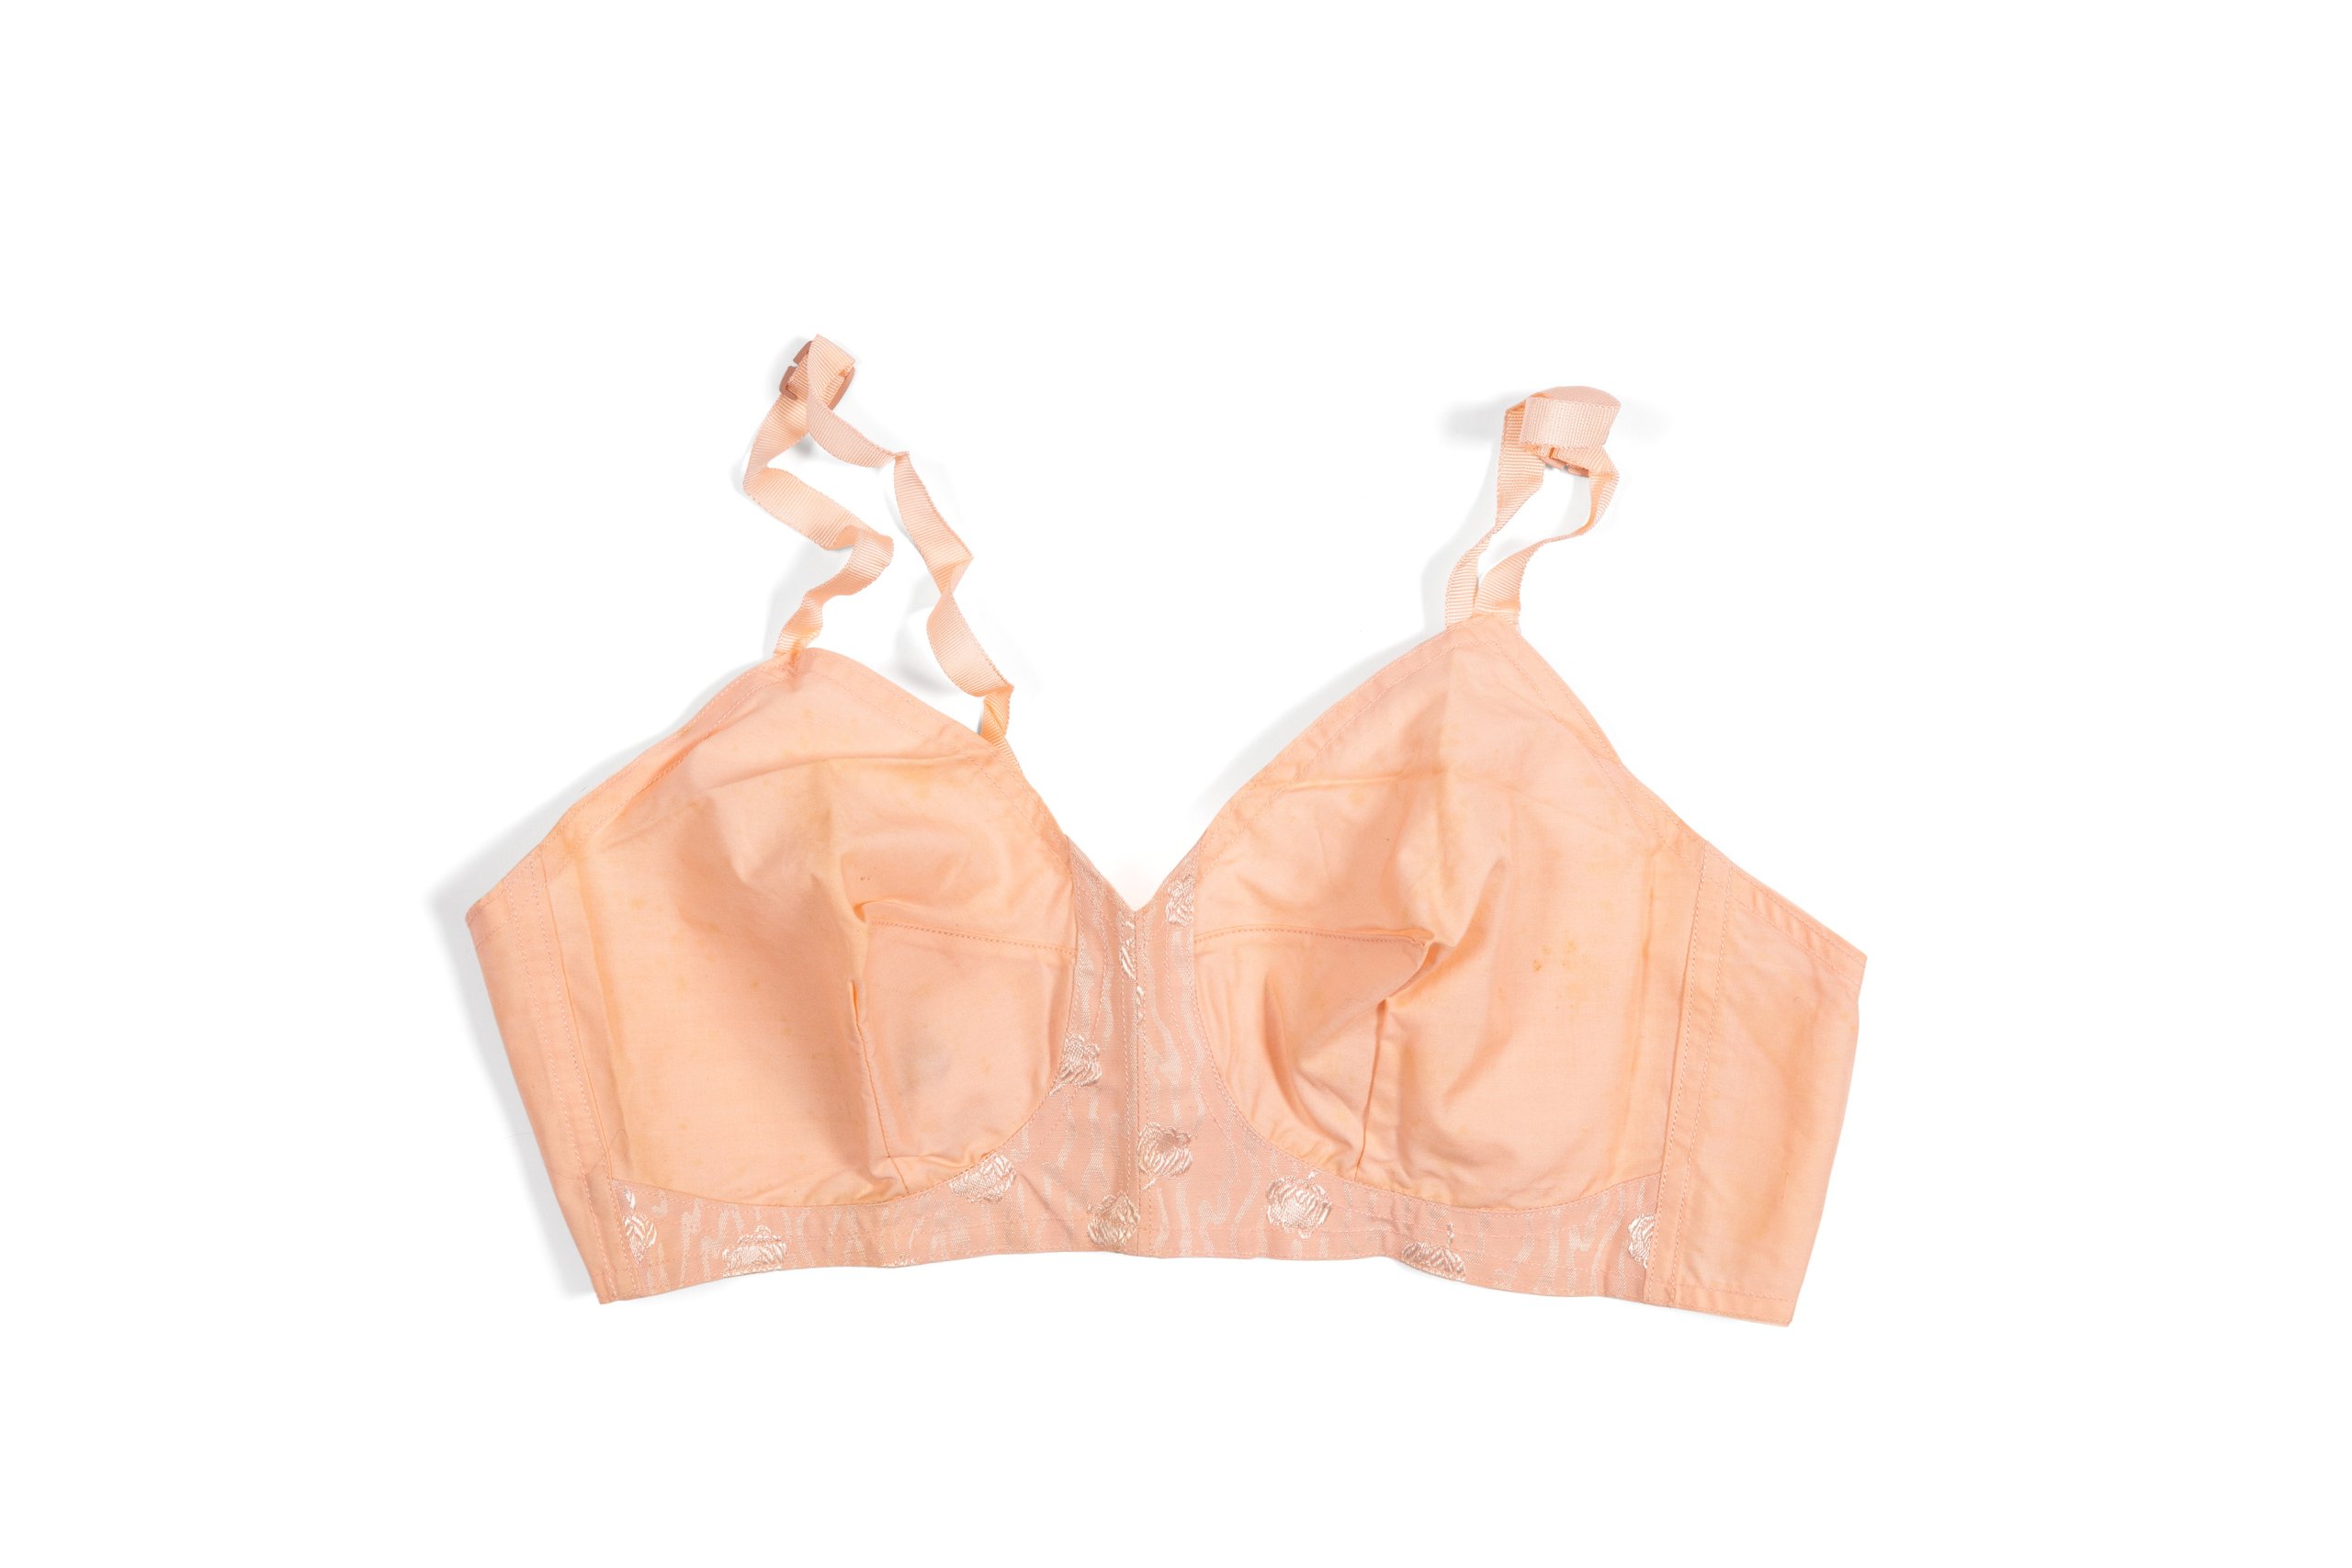 Powerhouse Collection - Utility bra by Sandre